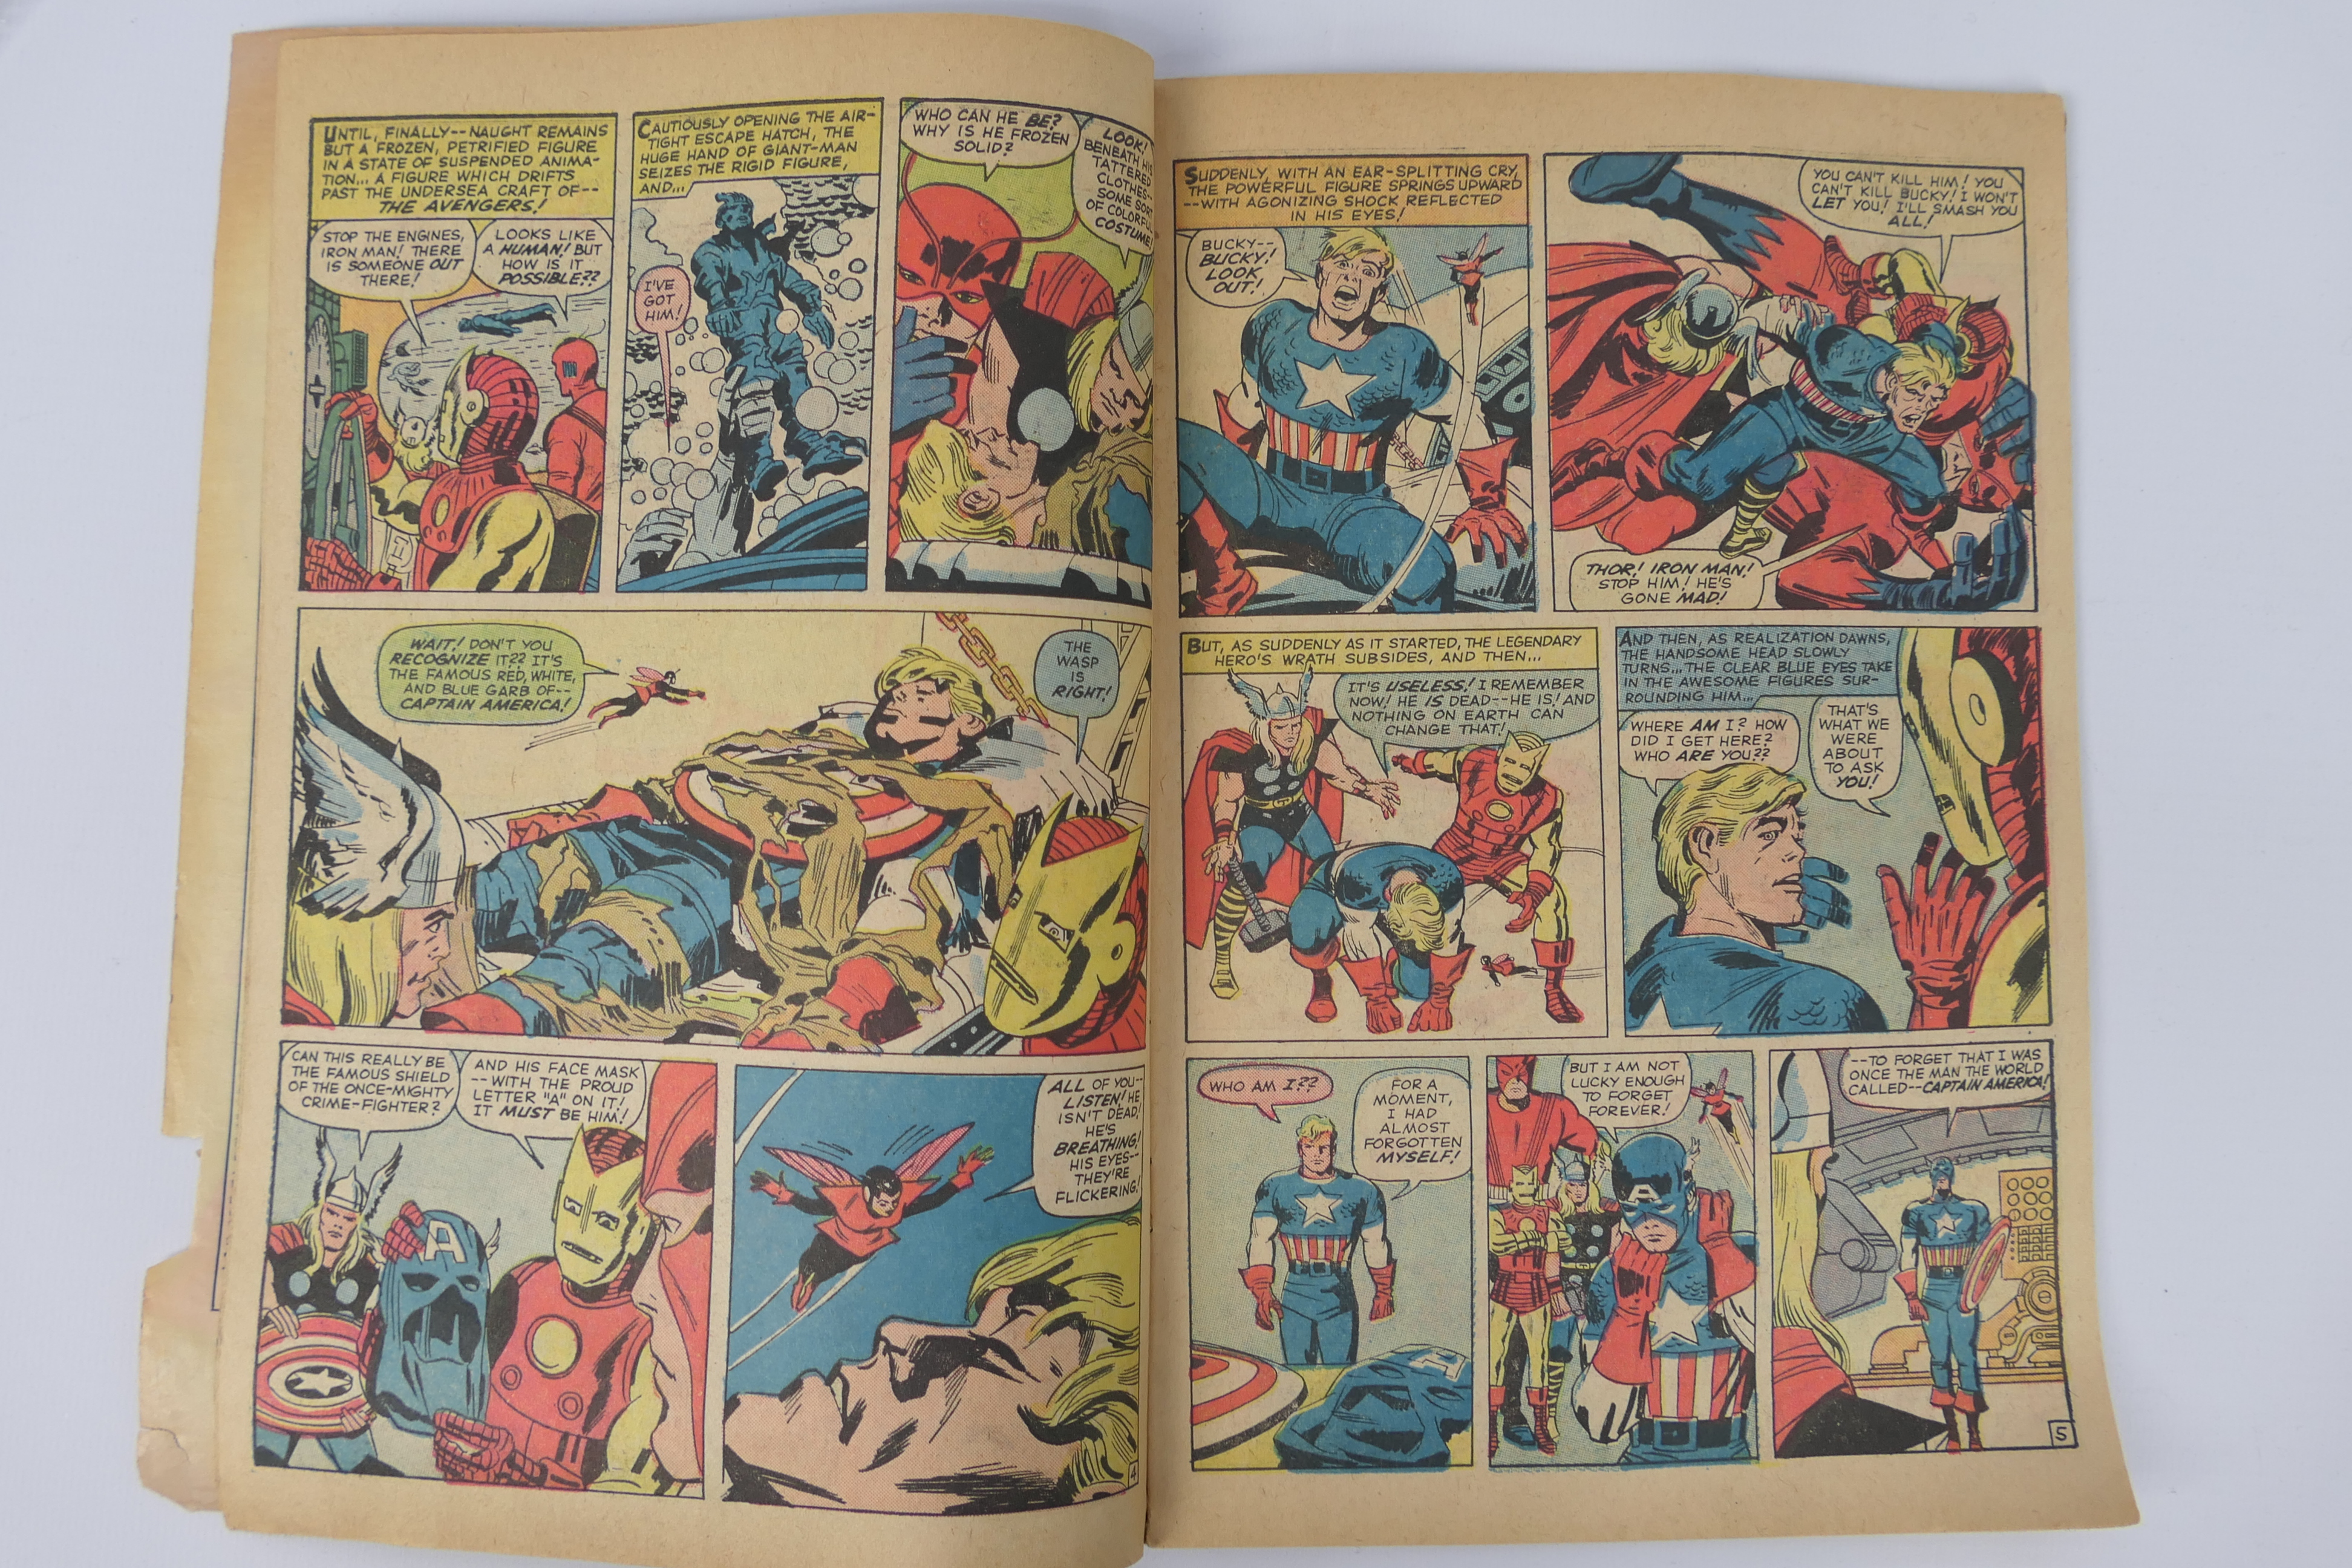 Marvel - The Avengers #4 March 1964 "Captain America Lives Again". - Image 12 of 12